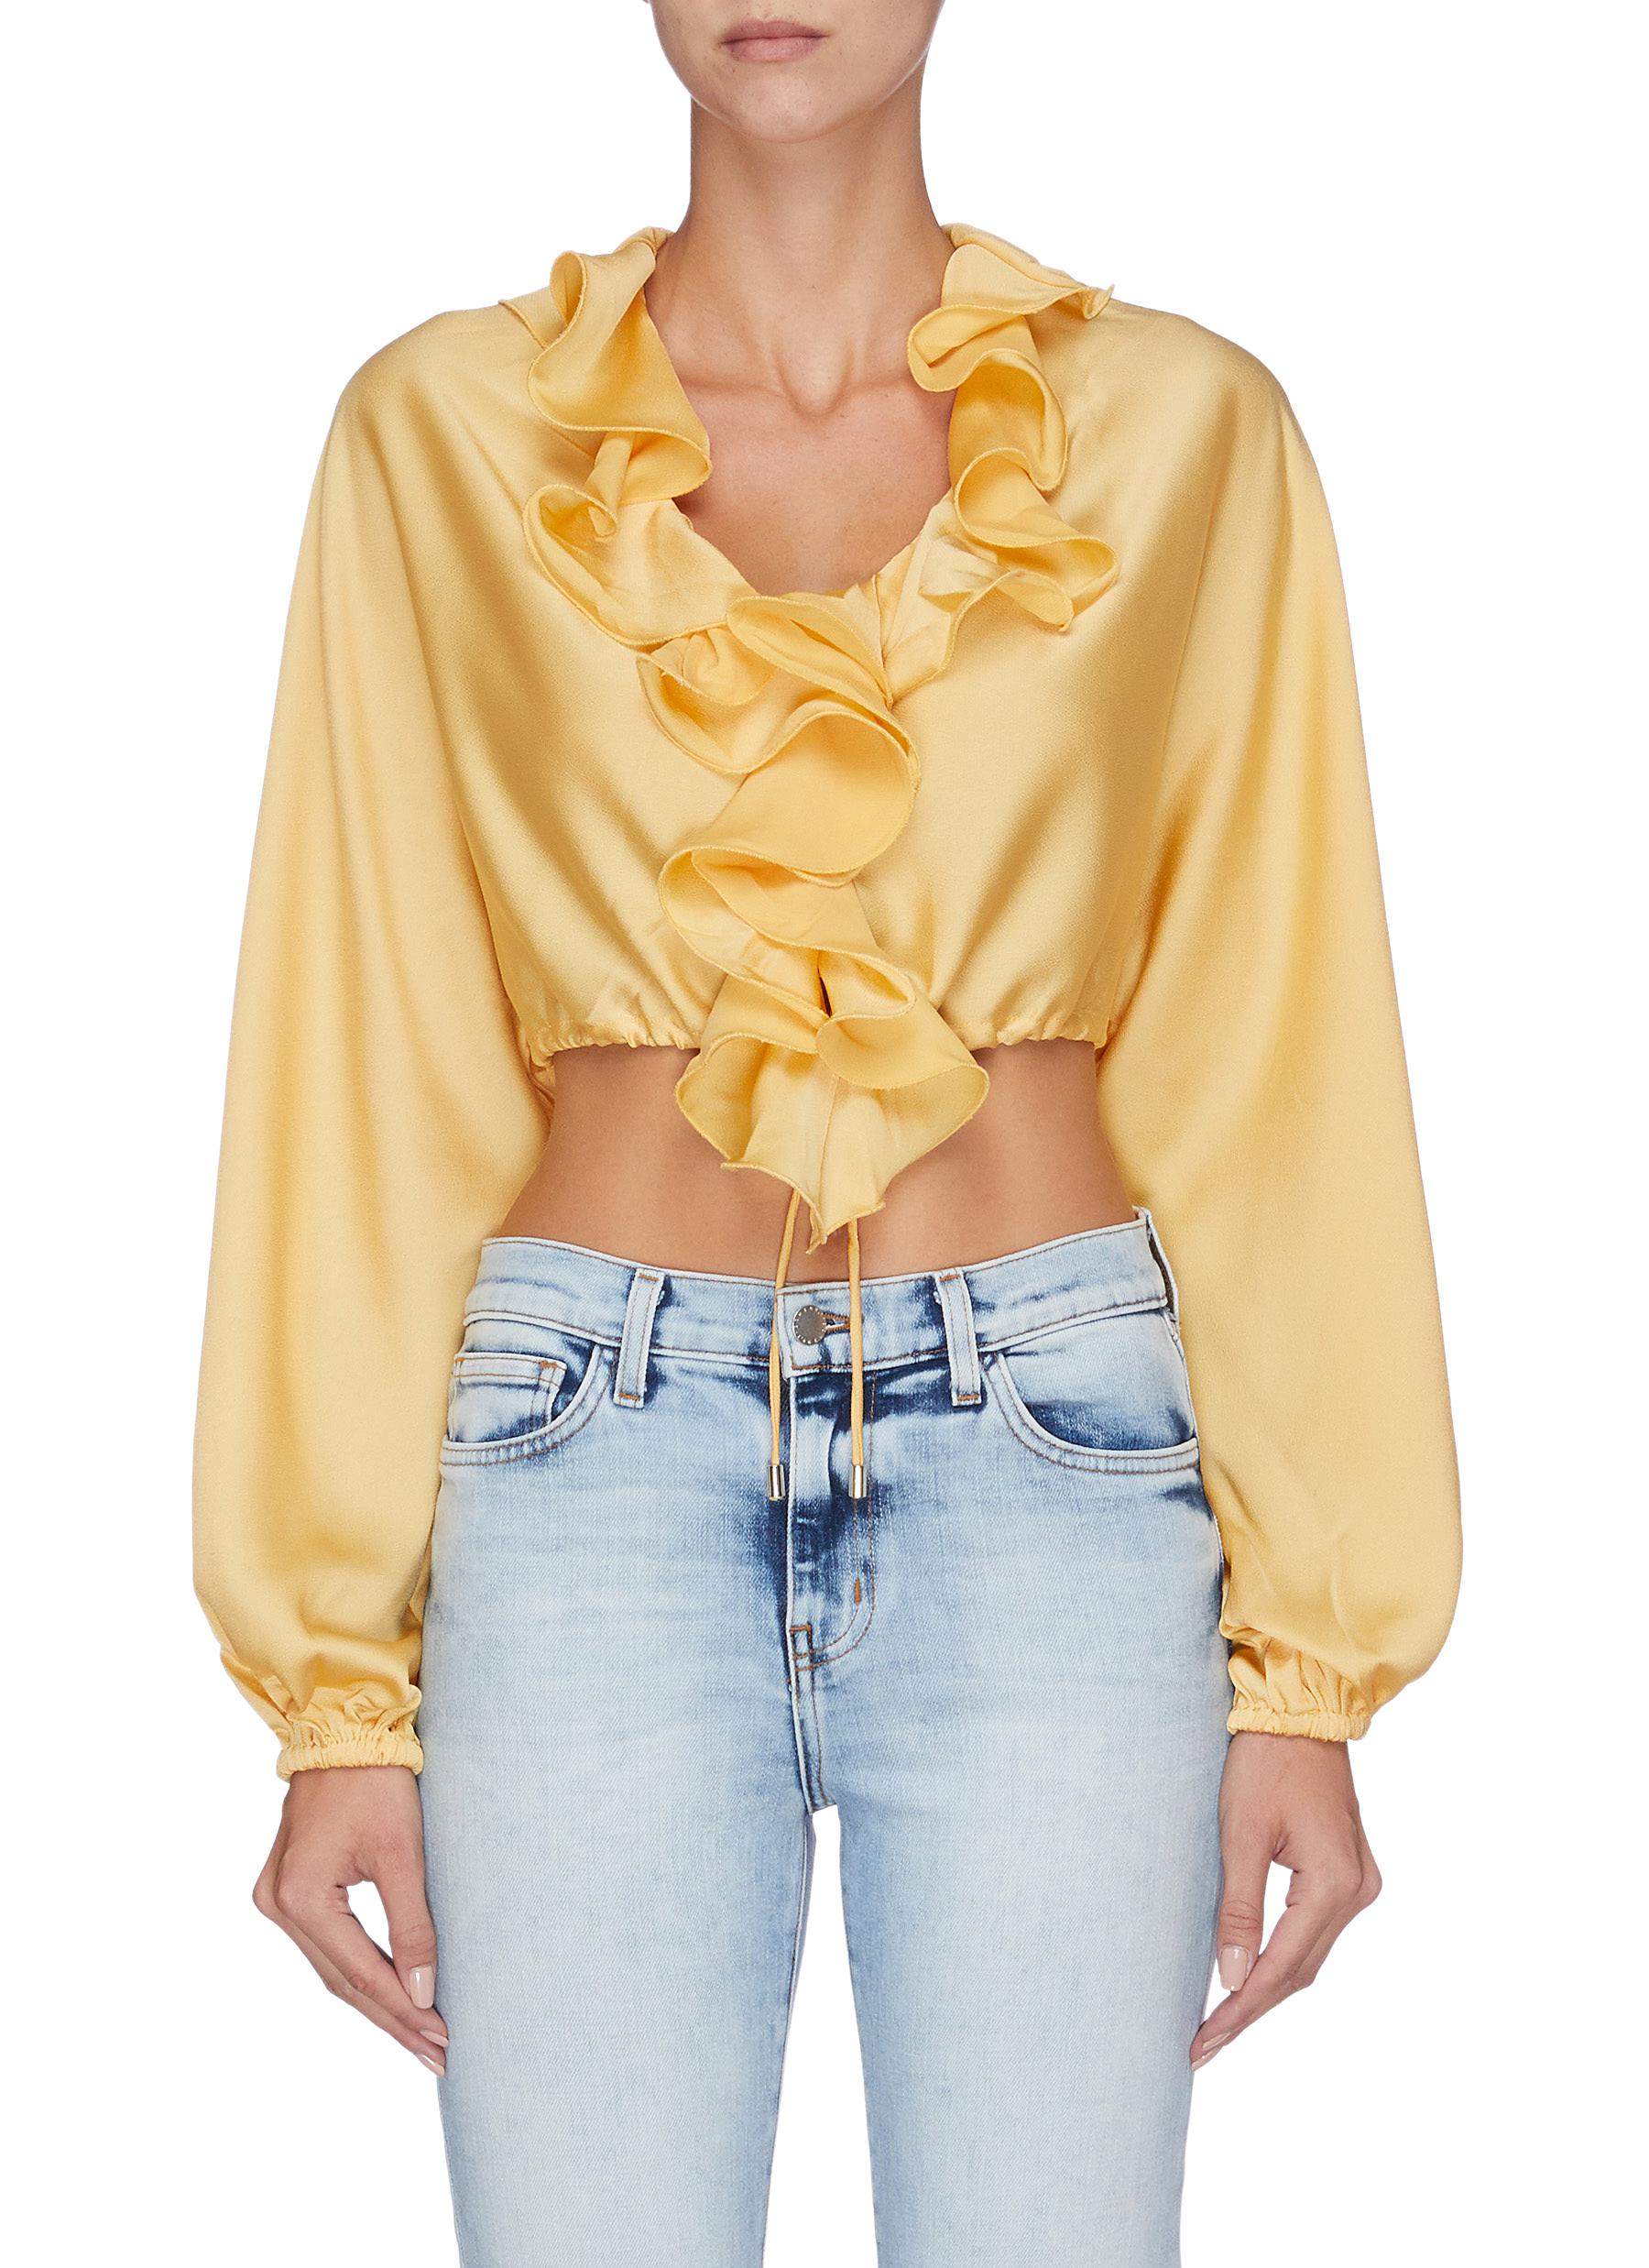 Knowing of this cropped jabot top by C/Meo Collective